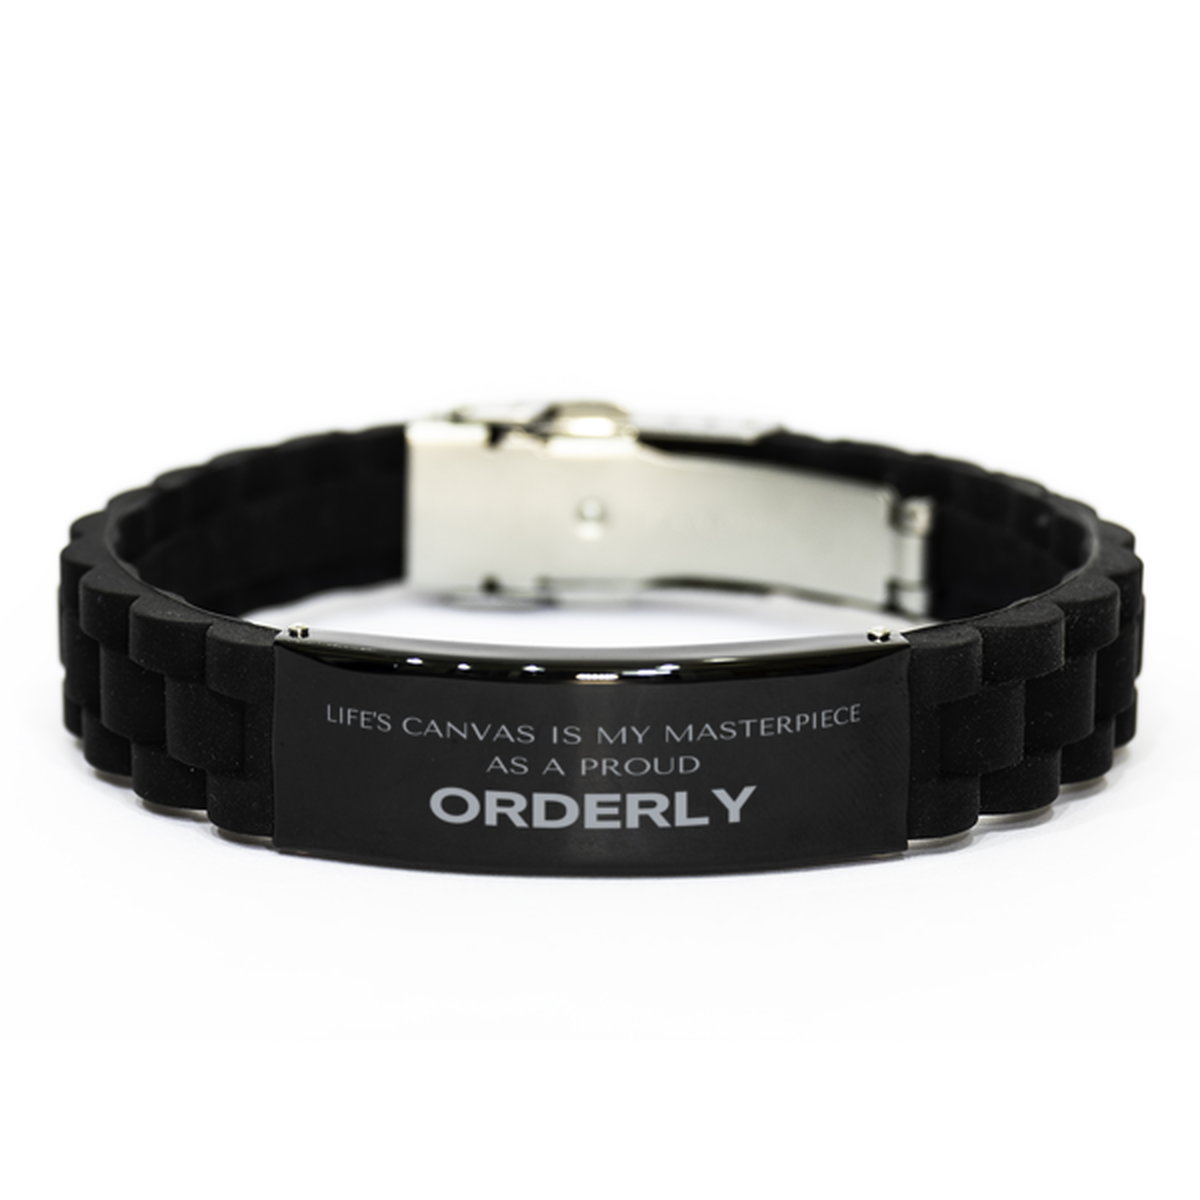 Proud Orderly Gifts, Life's canvas is my masterpiece, Epic Birthday Christmas Unique Black Glidelock Clasp Bracelet For Orderly, Coworkers, Men, Women, Friends